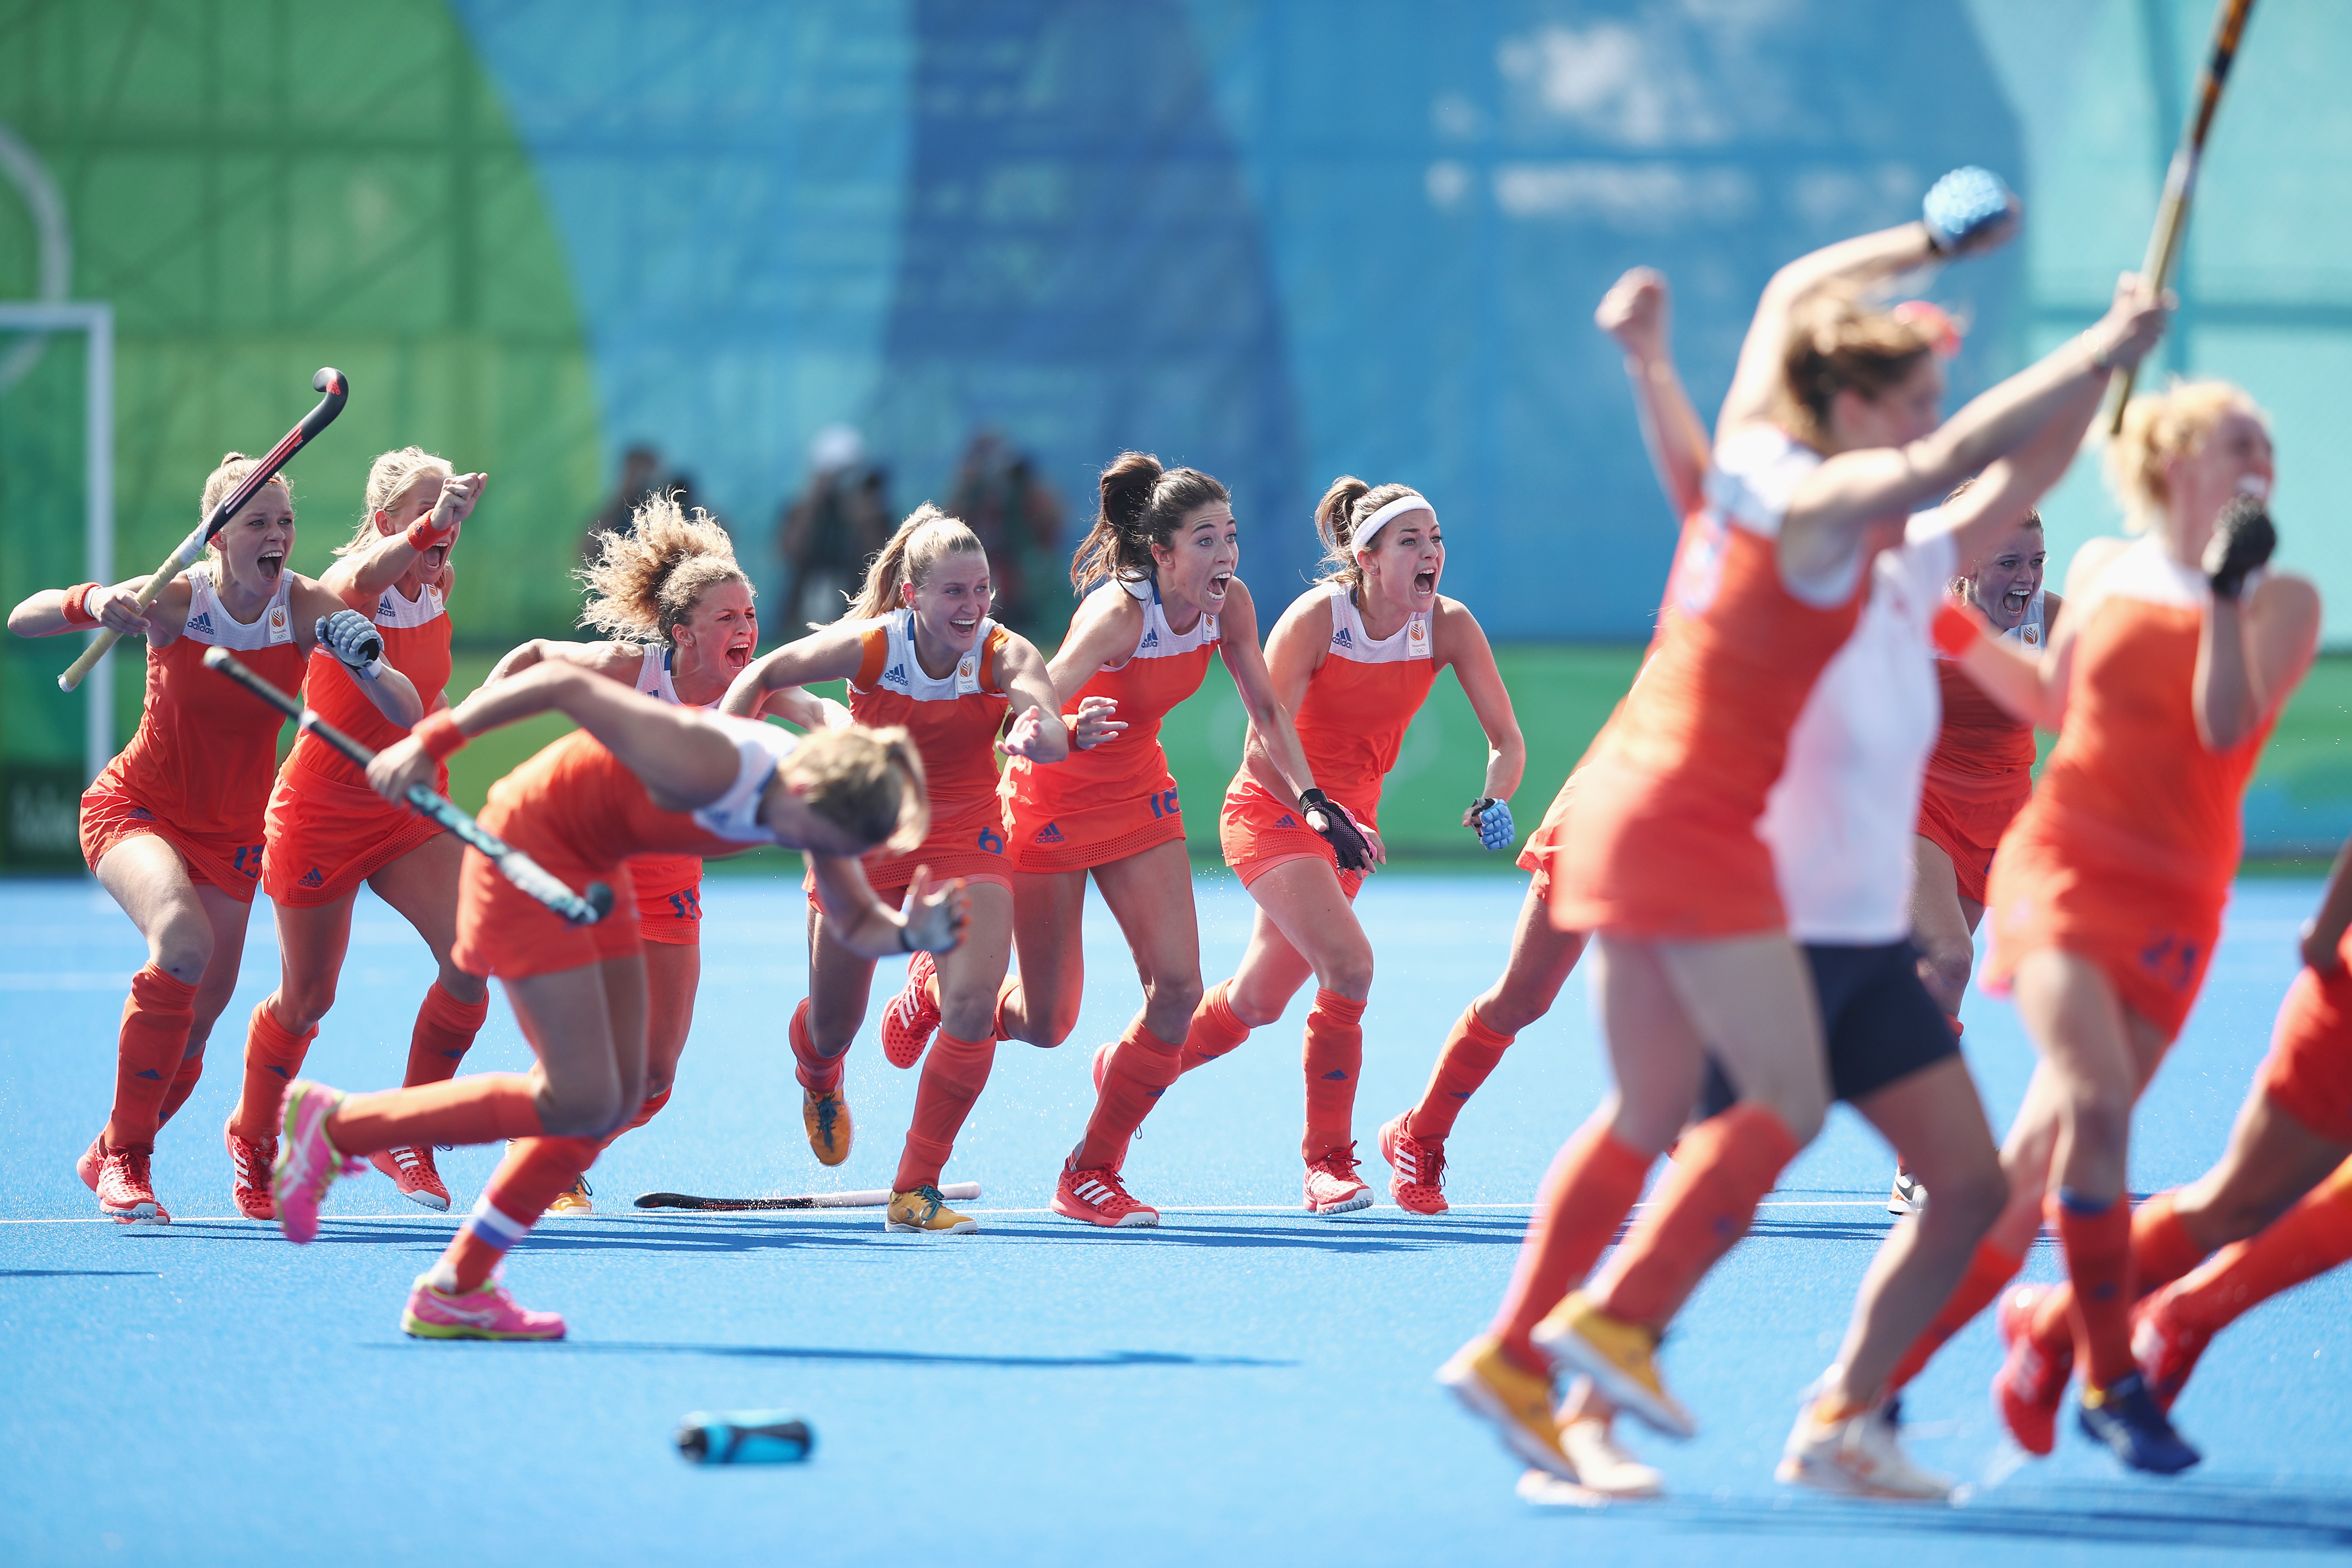 RIO DE JANEIRO, BRAZIL - AUGUST 17: The Netherlands celebrate victory in the penalty shootout during the womens semifinal match between the Netherlands and Germany on Day 12 of the Rio 2016 Olympic Games at the Olympic Hockey Centre on August 17, 2016 in Rio de Janeiro, Brazil. (Photo by Mark Kolbe/Getty Images)